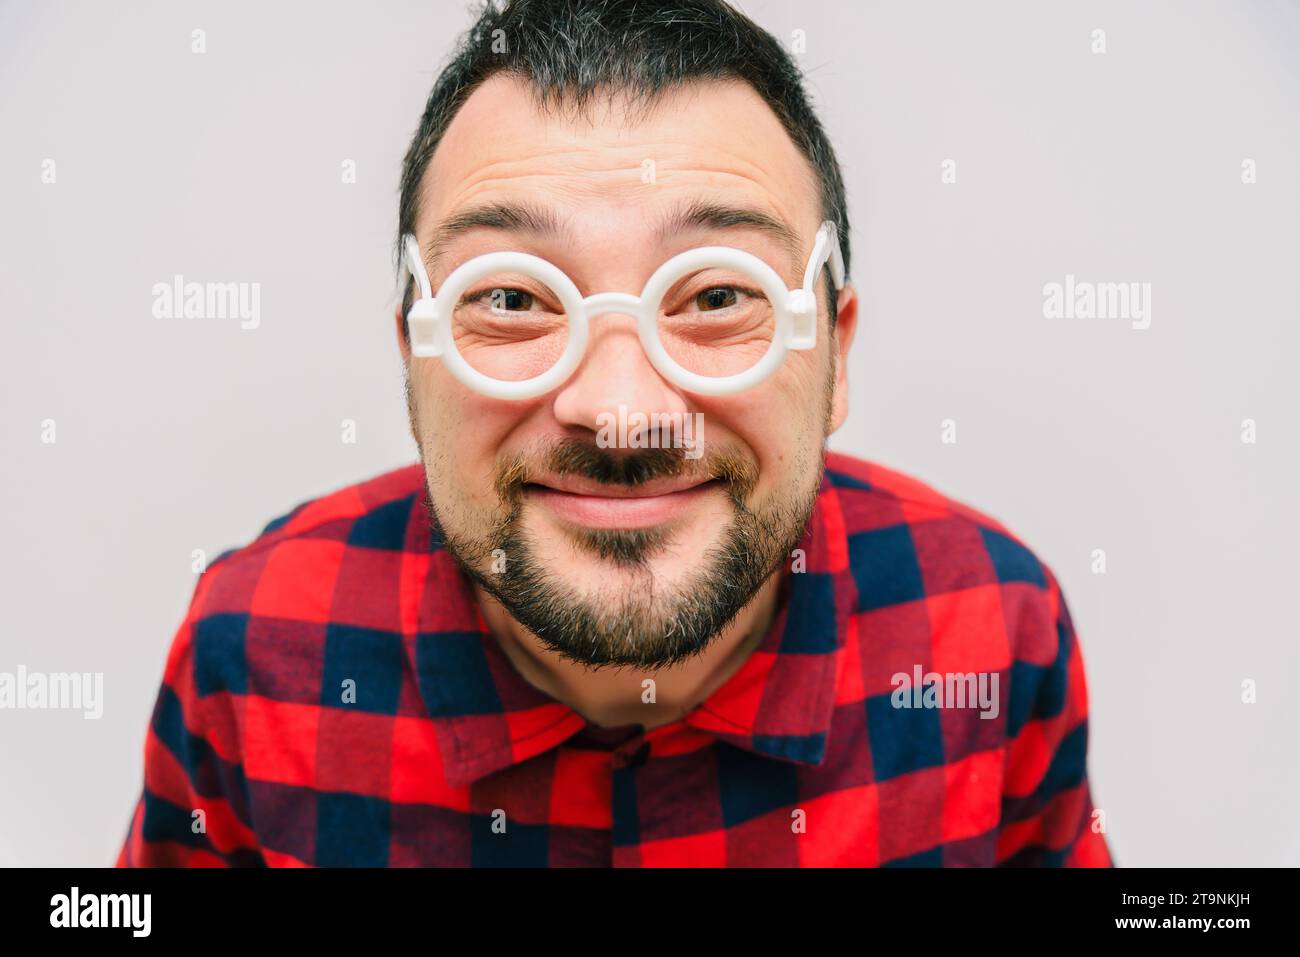 Funny portrait of a man with glasses. Cheerful bearded science geeks looking at the camera close up. Сomic nerd close-up portrait. Stock Photo